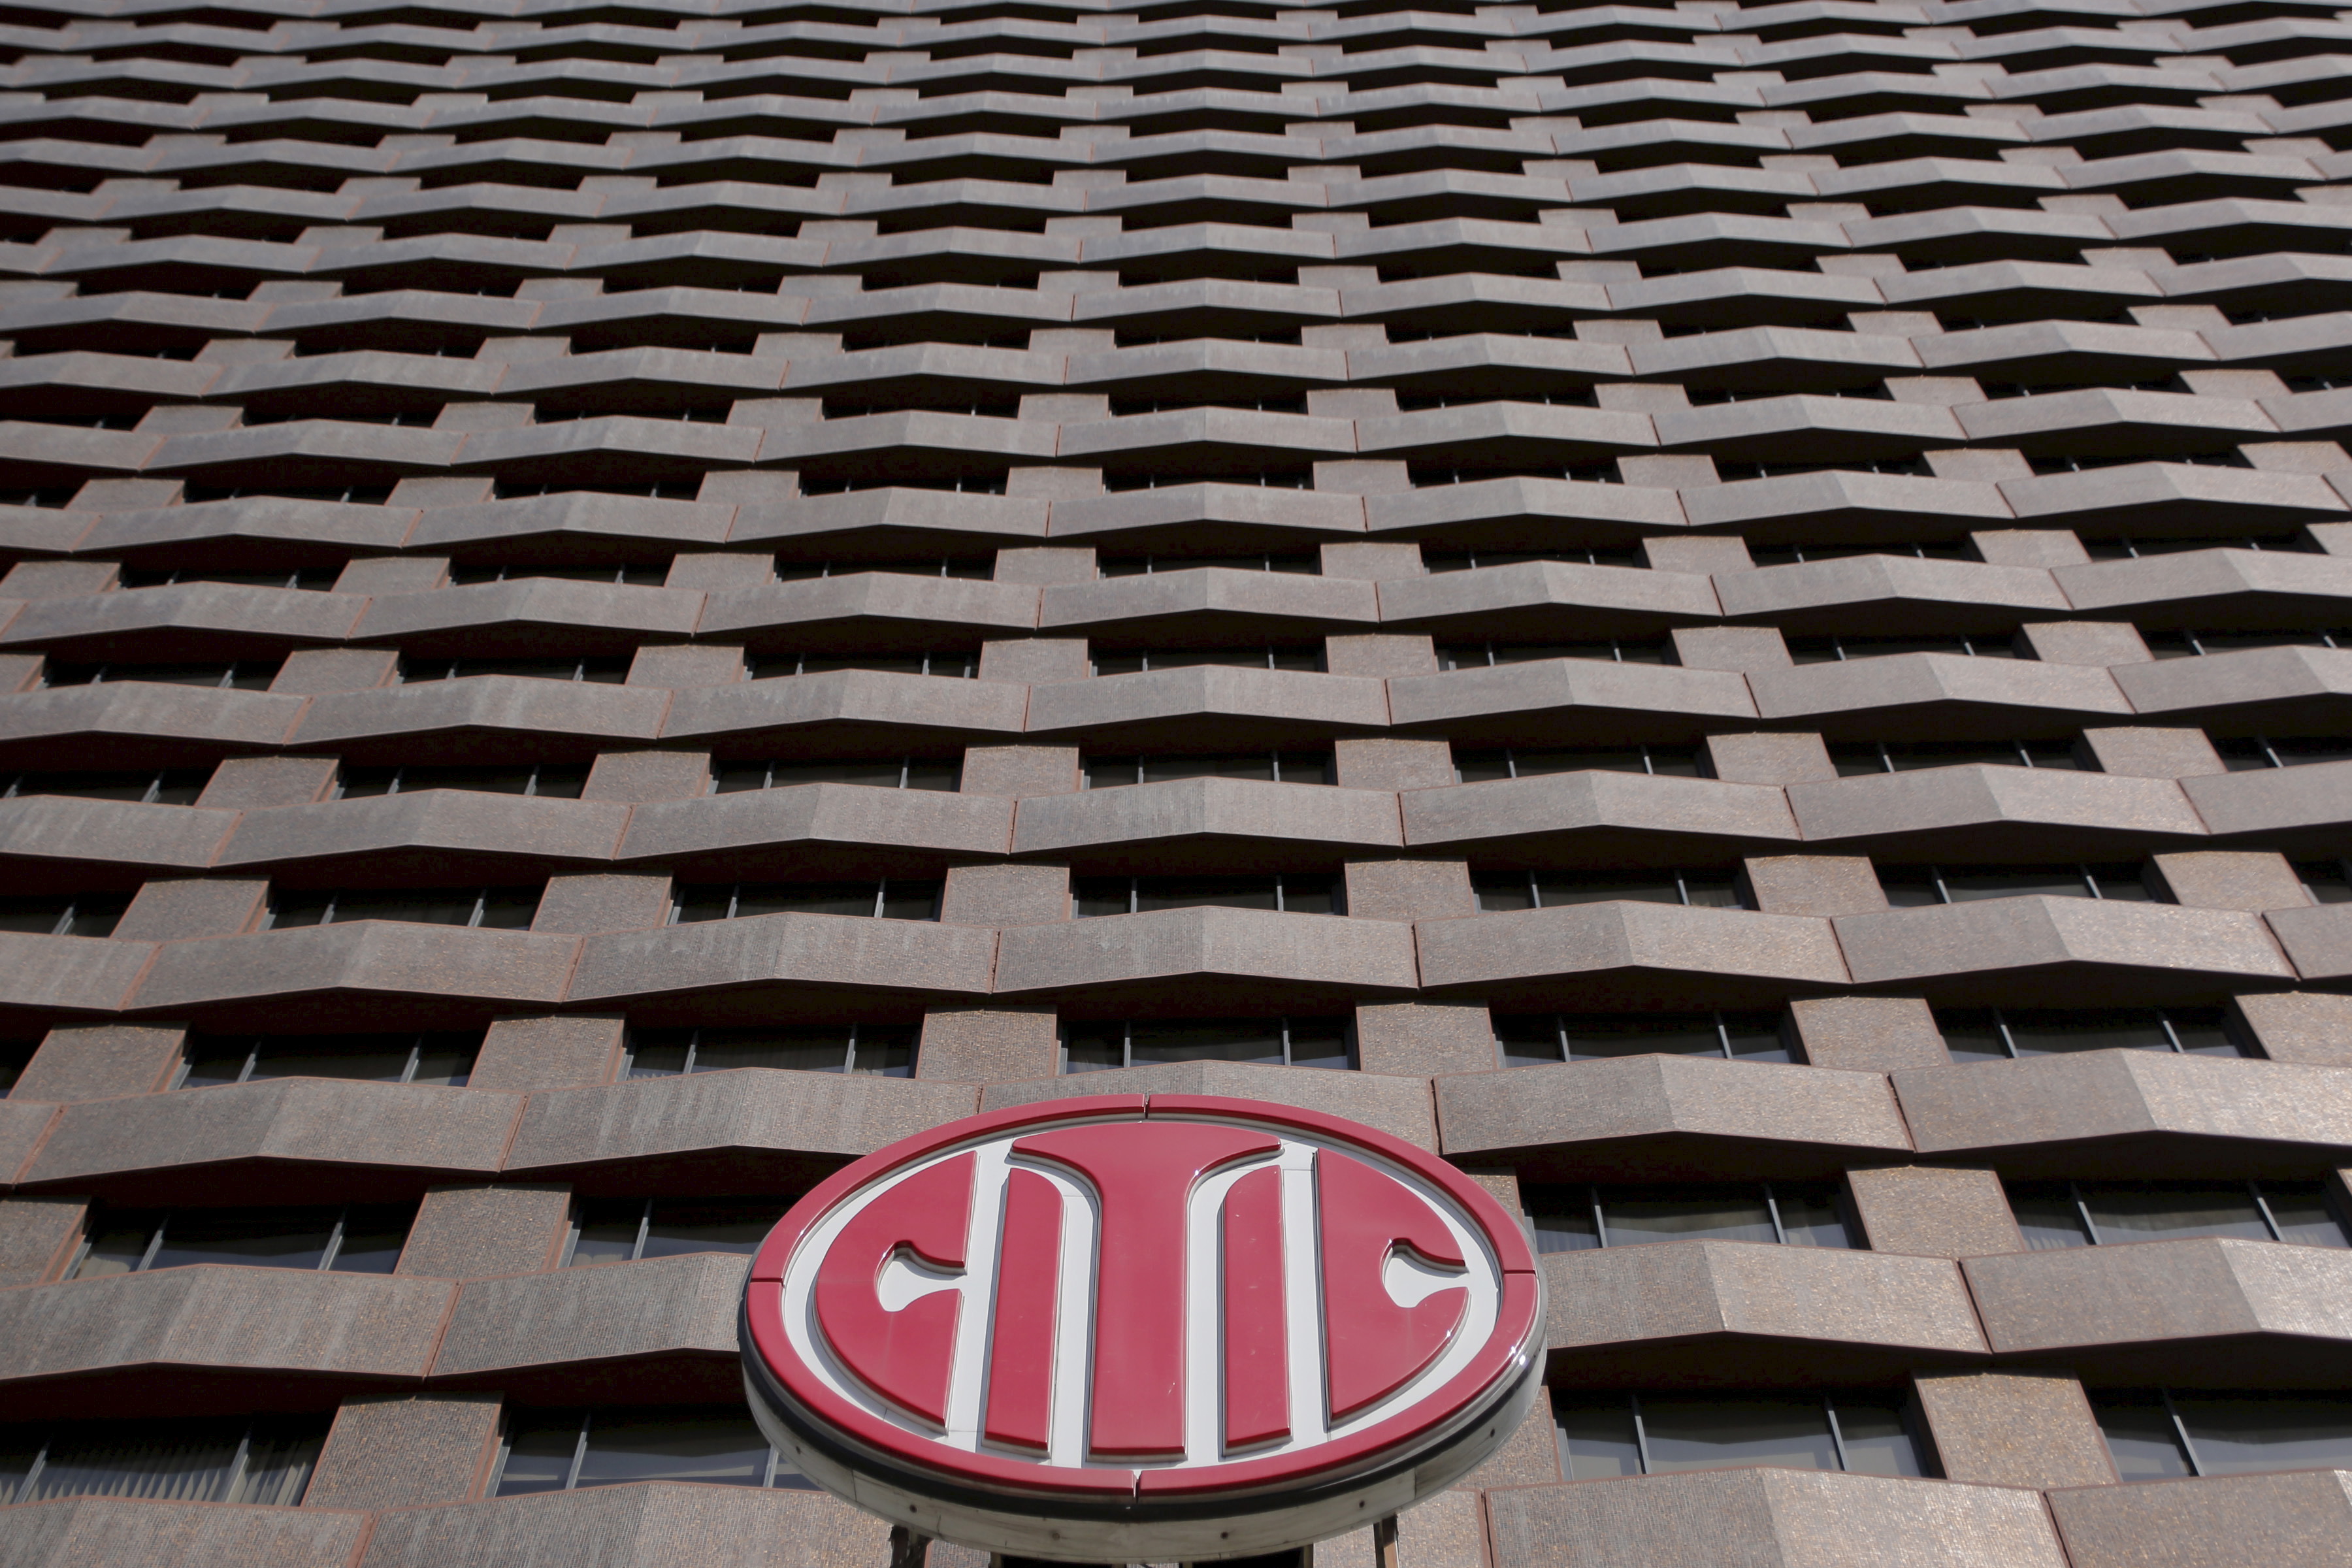 A CITIC Securities logo is seen at a building where its branch is located in Beijing, China